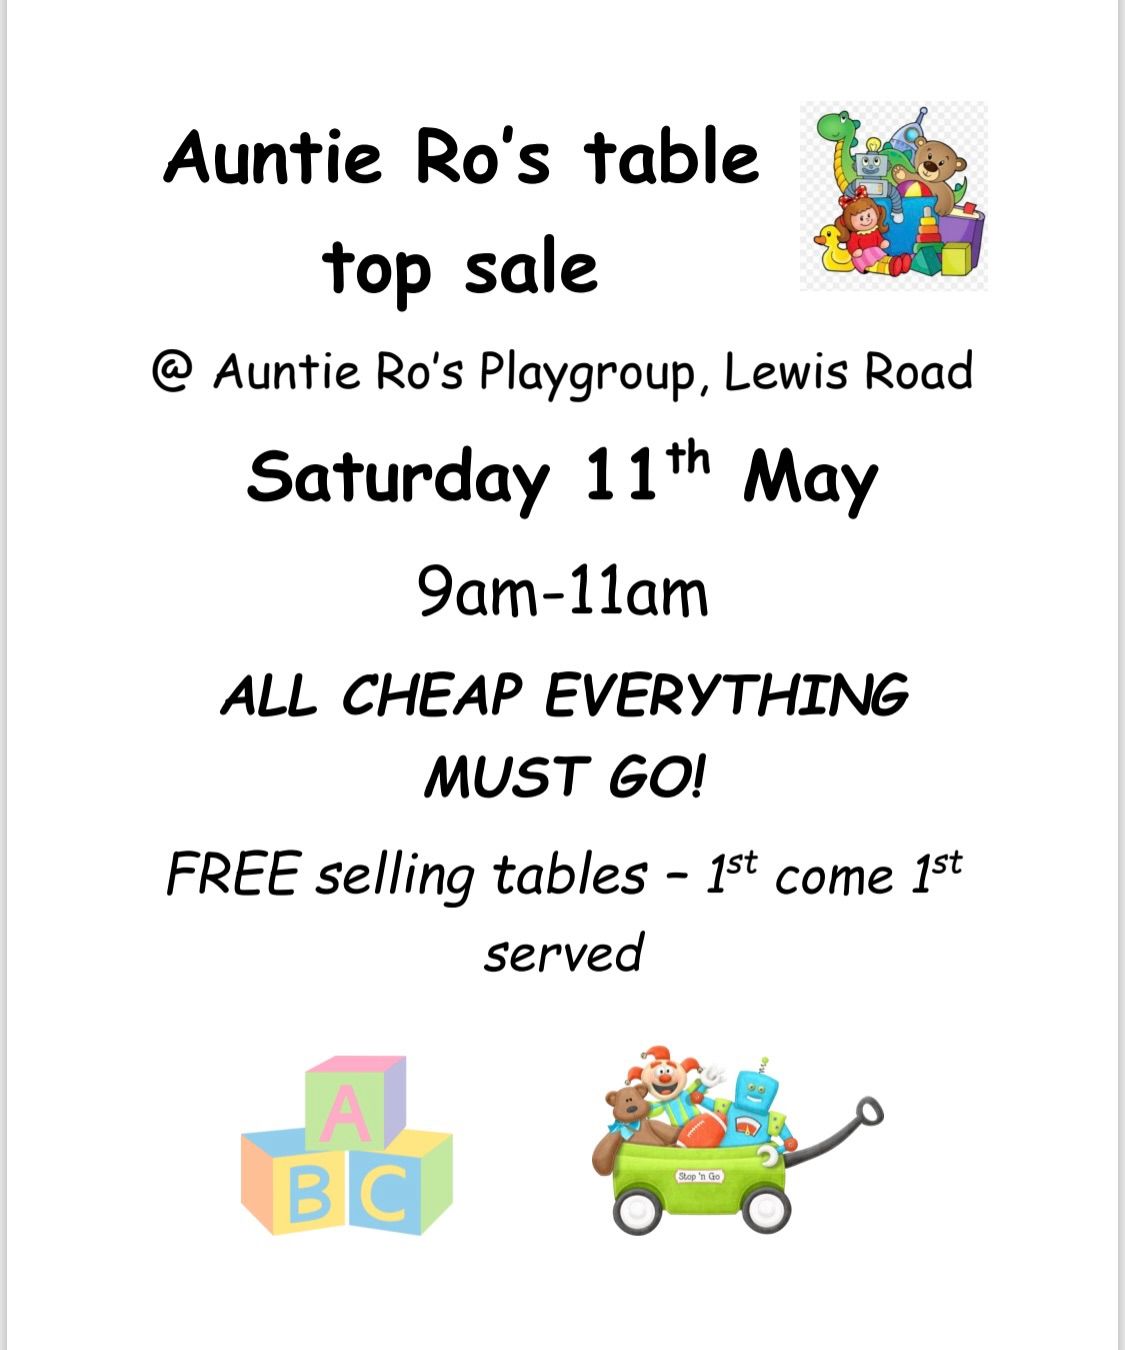 Table top sale - EVERYTHING MUST GO!